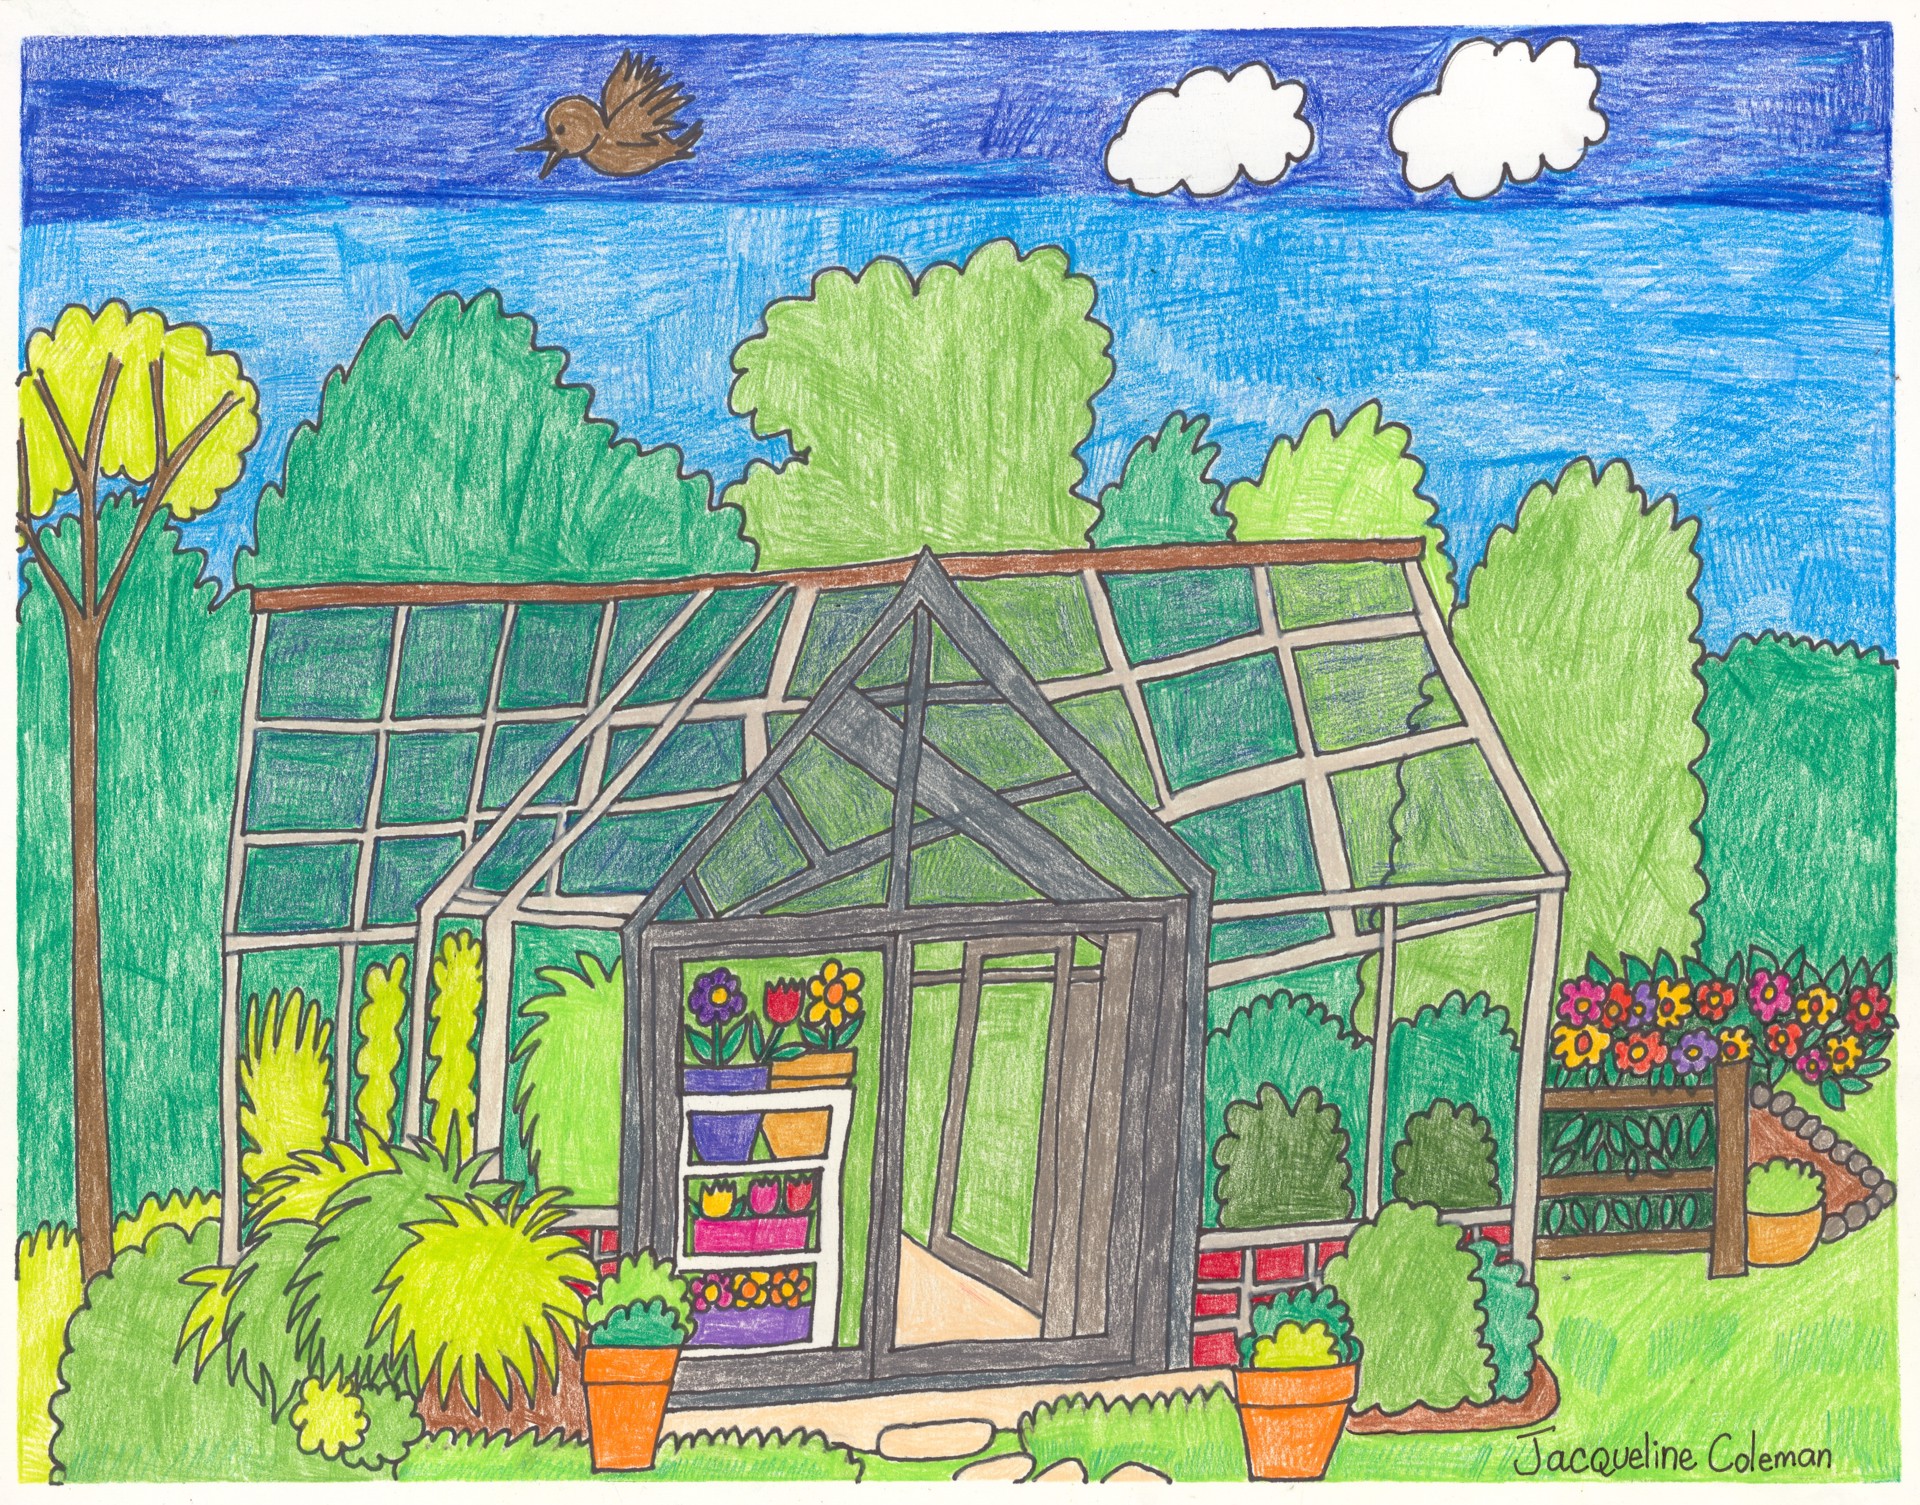 The Greenhouse by the Lake by Jacqueline Coleman